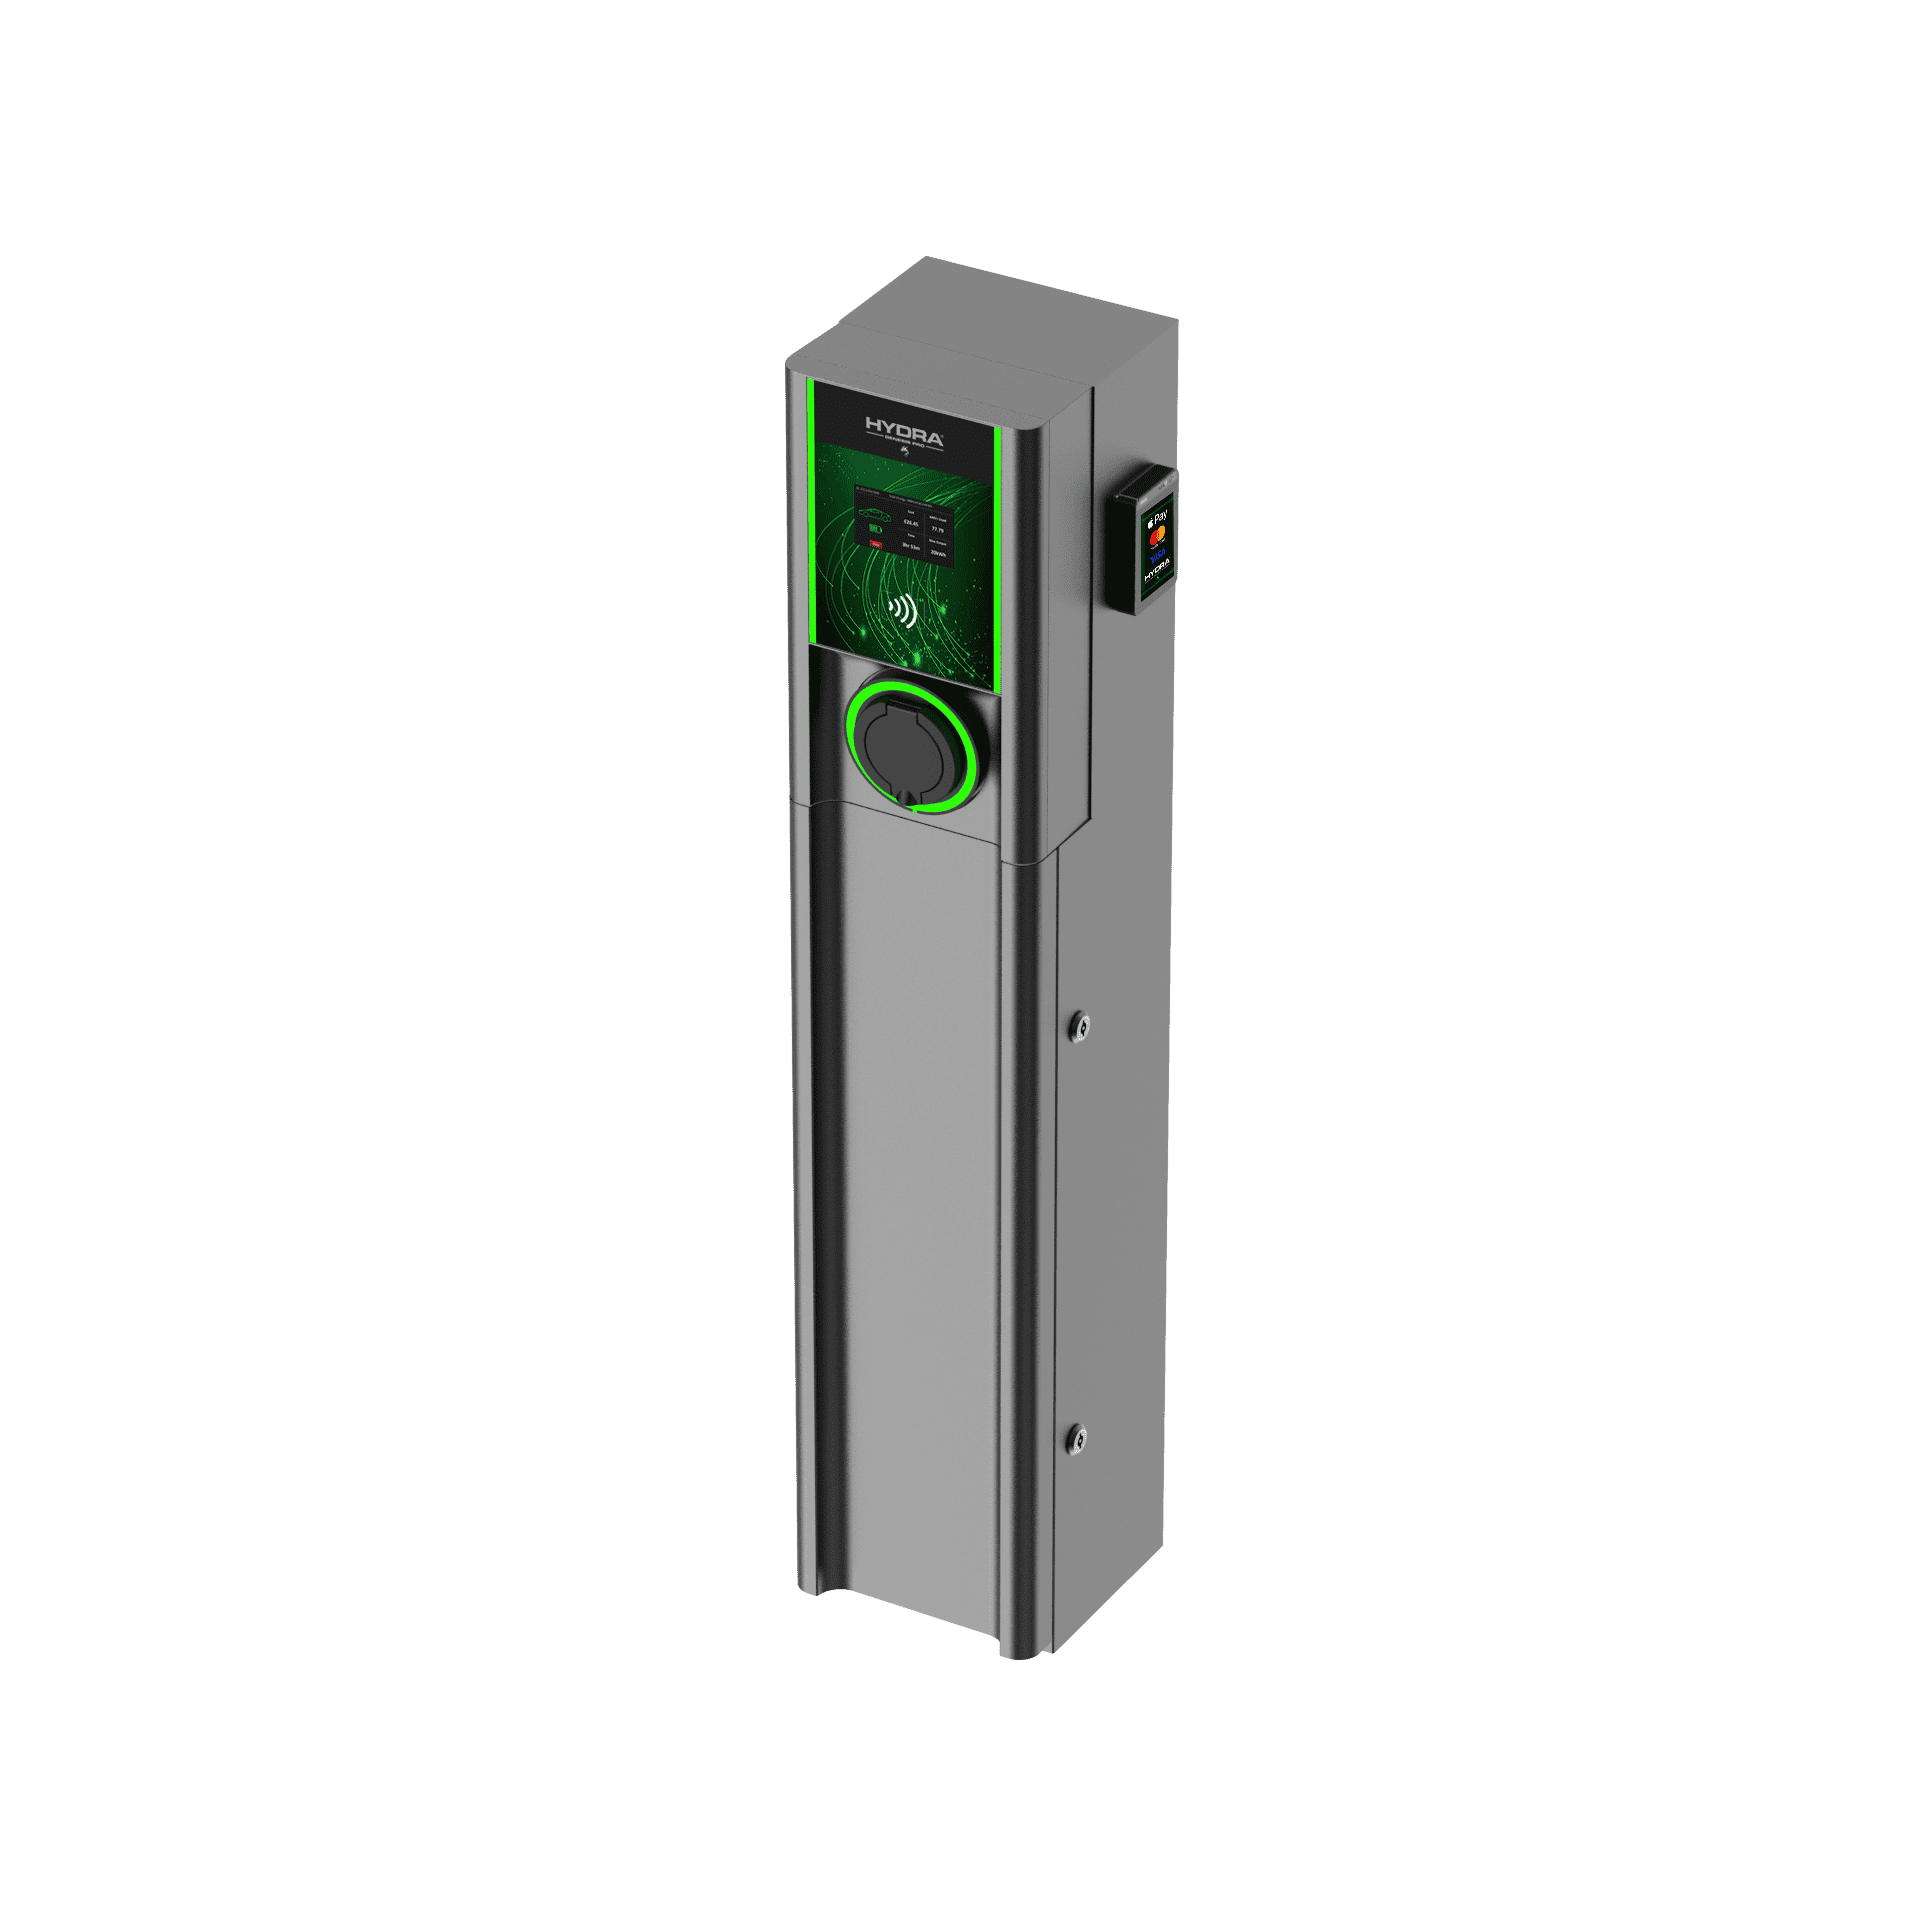 Hydra Genesis Pro Dual AC 7kW/22kW Socket – with payment terminal